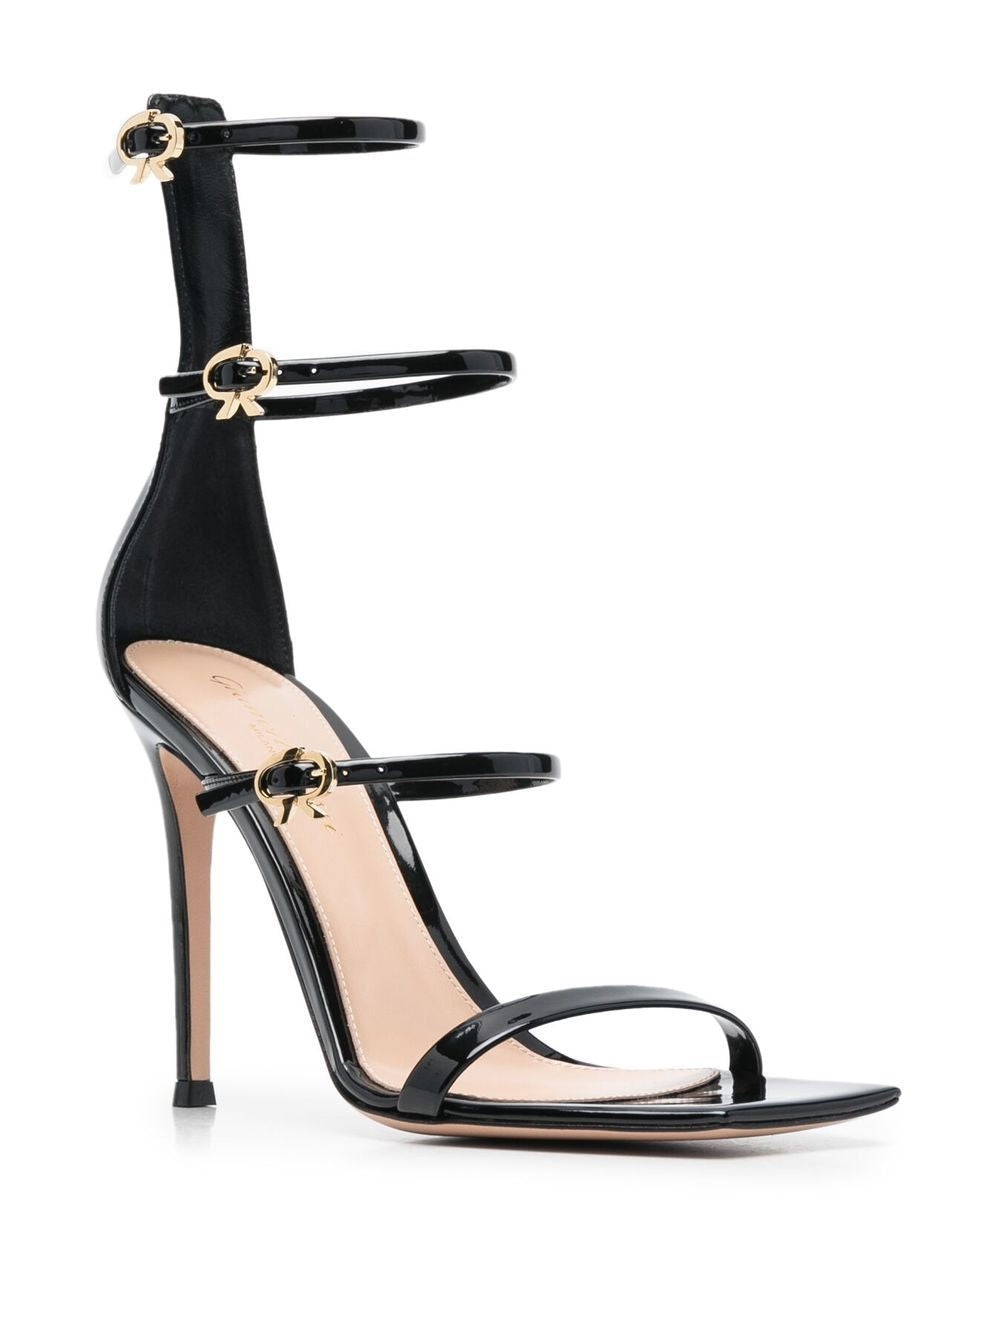 GIANVITO ROSSI Black Sandals for Women - FW22 Collection